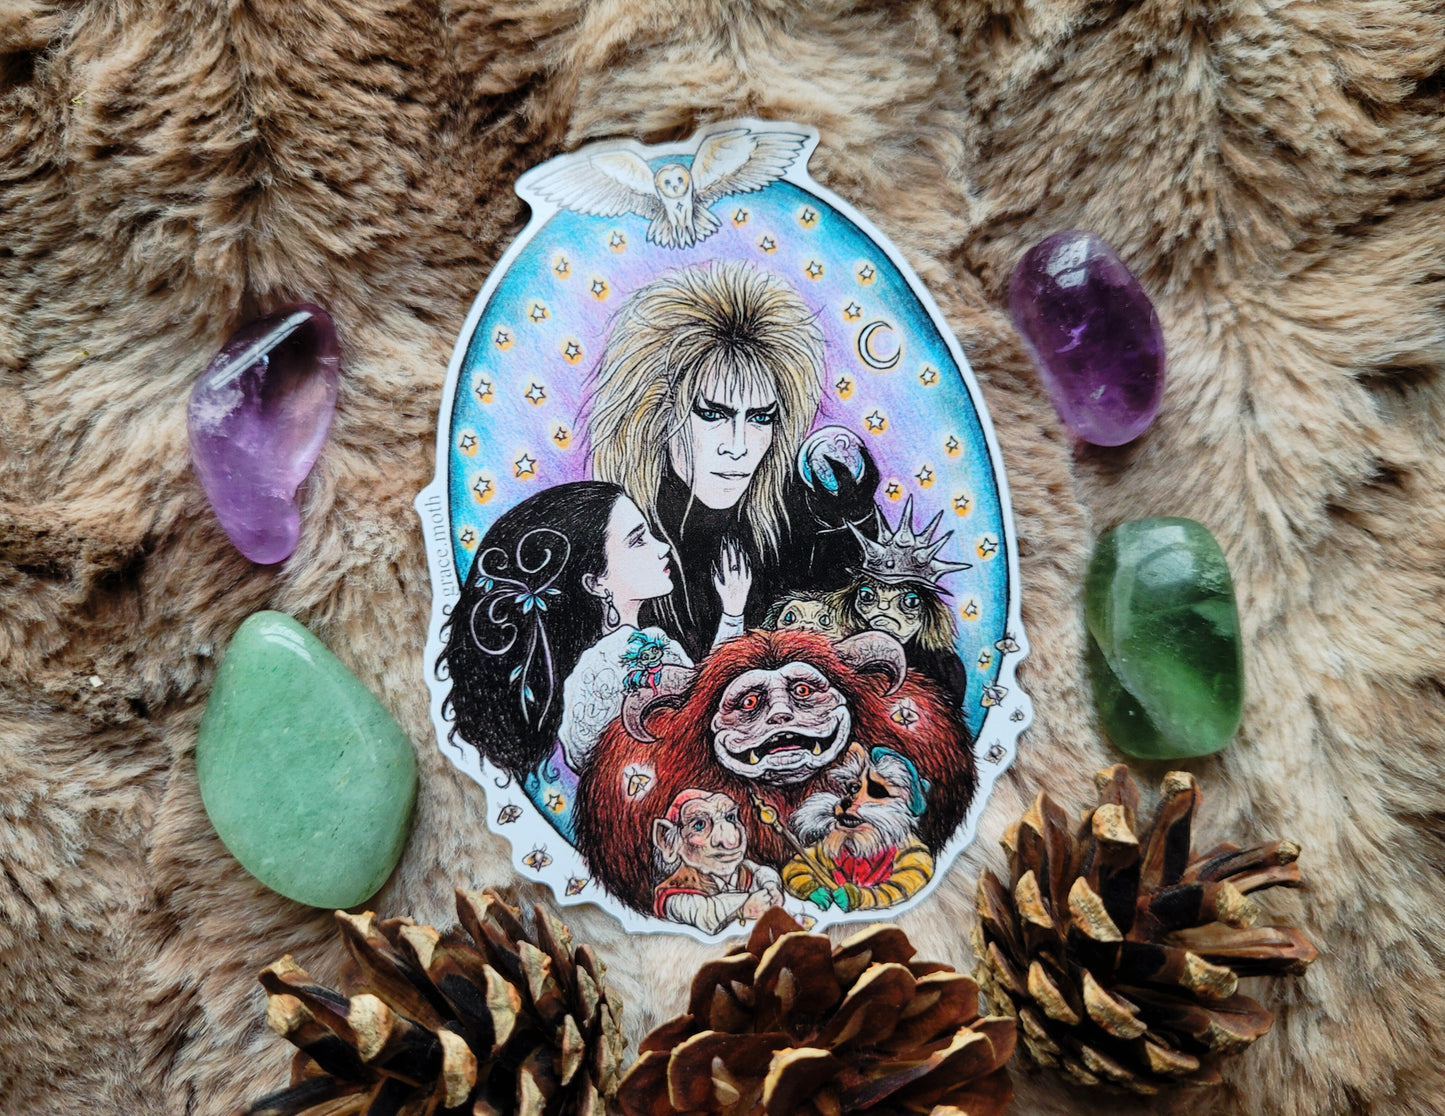 Labyrinth - Vinyl Sticker 10cm - David Bowie Fan Art - Goblin King - Witchy - Gothic - Illustrated by Grace moth